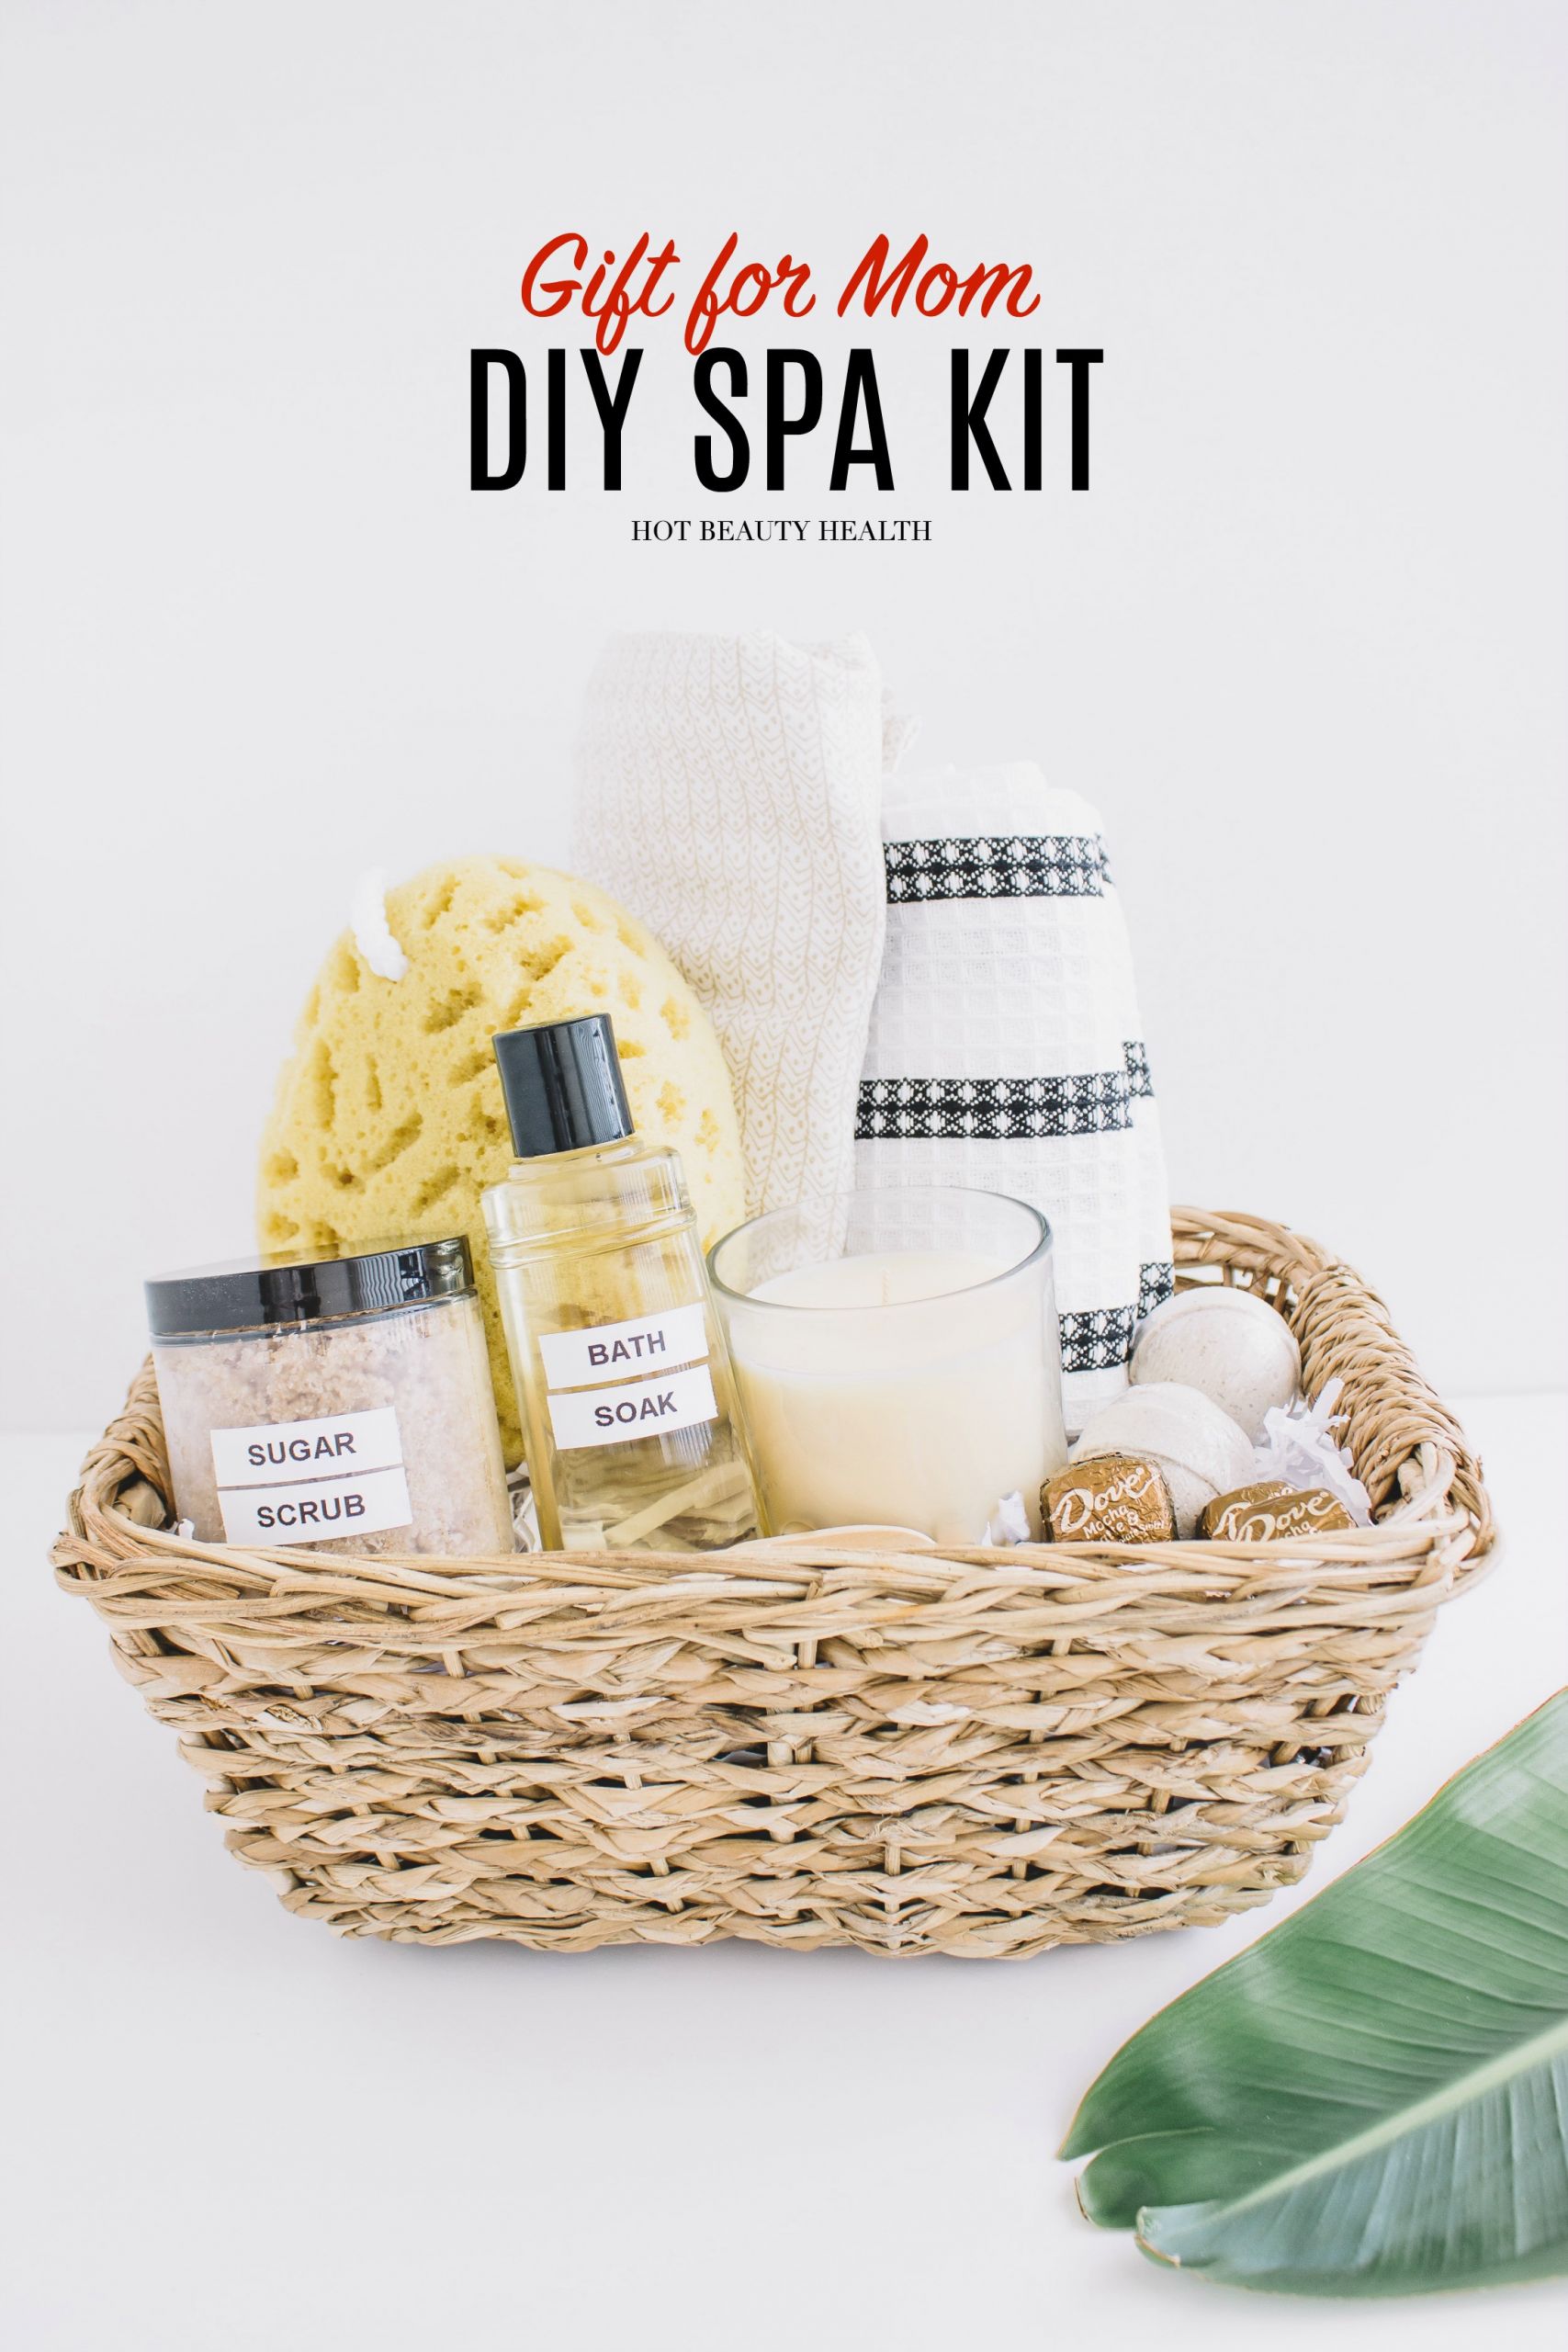 DIY Kits Gifts
 The Perfect DIY Spa Kit to Unwind and Relax Hot Beauty Health